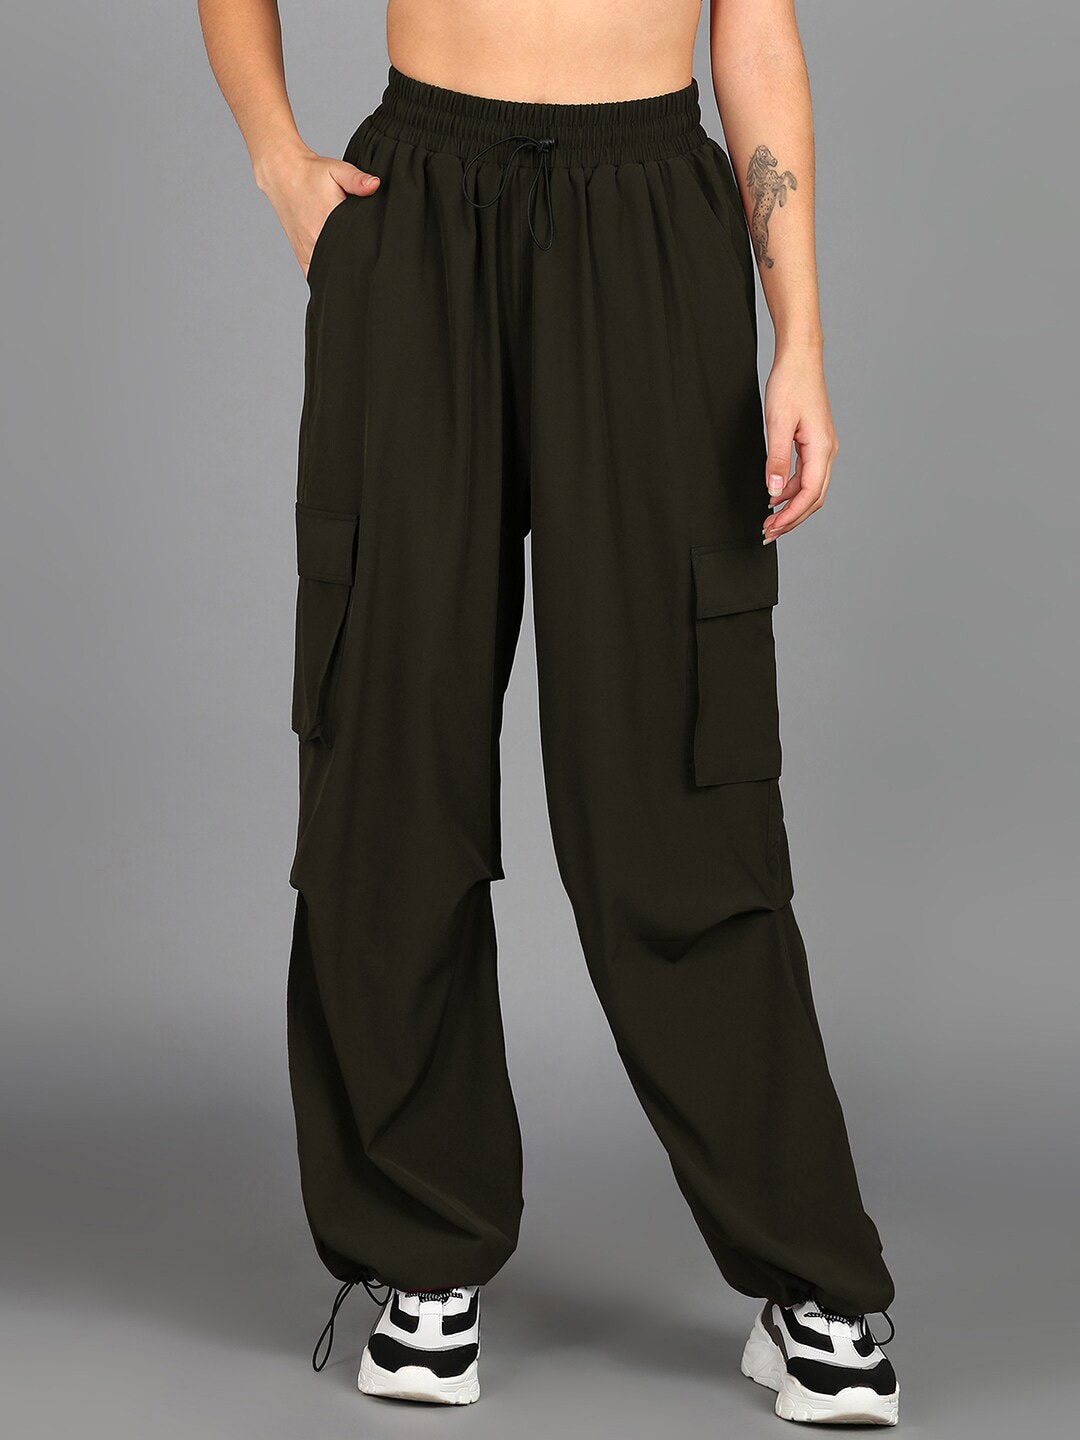 The Roadster Lifestyle Co. Women Baggy Fit High-Rise Parachute Jogger Trouser Price in India